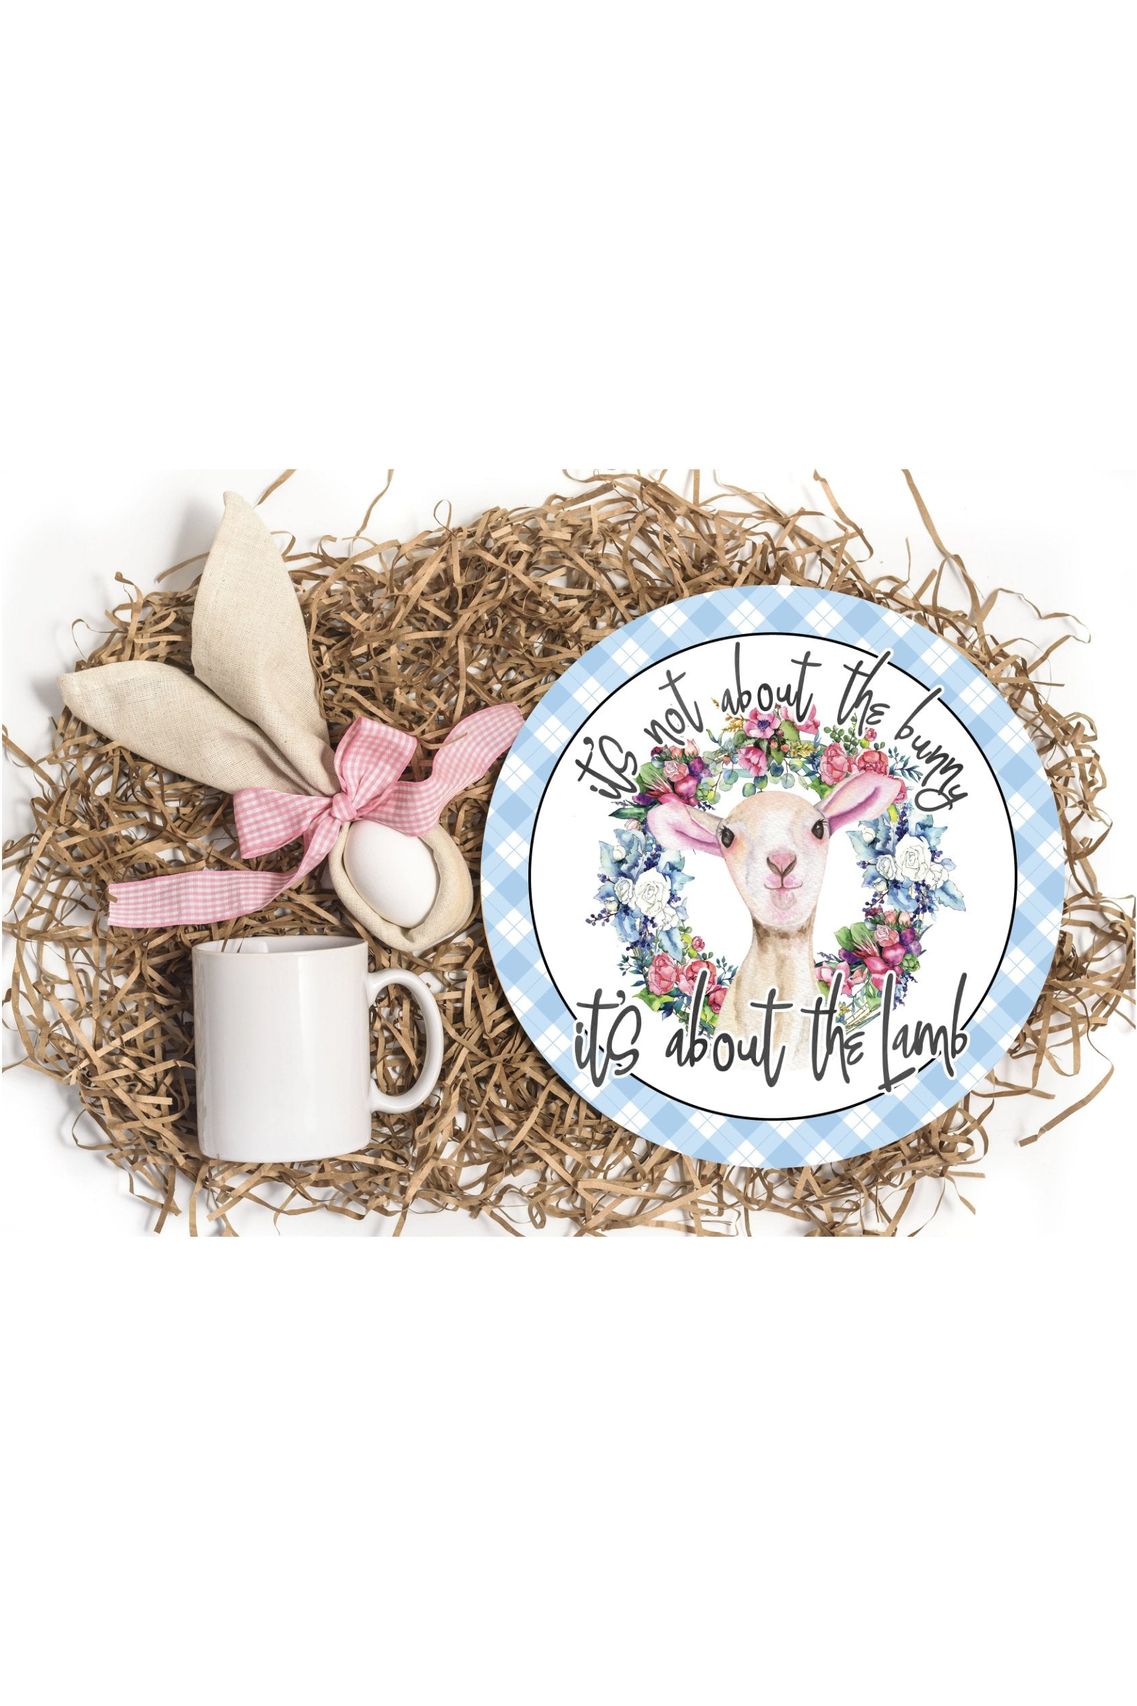 Shop For Not About The Bunny About The Lamb Sign - Wreath Enhancement